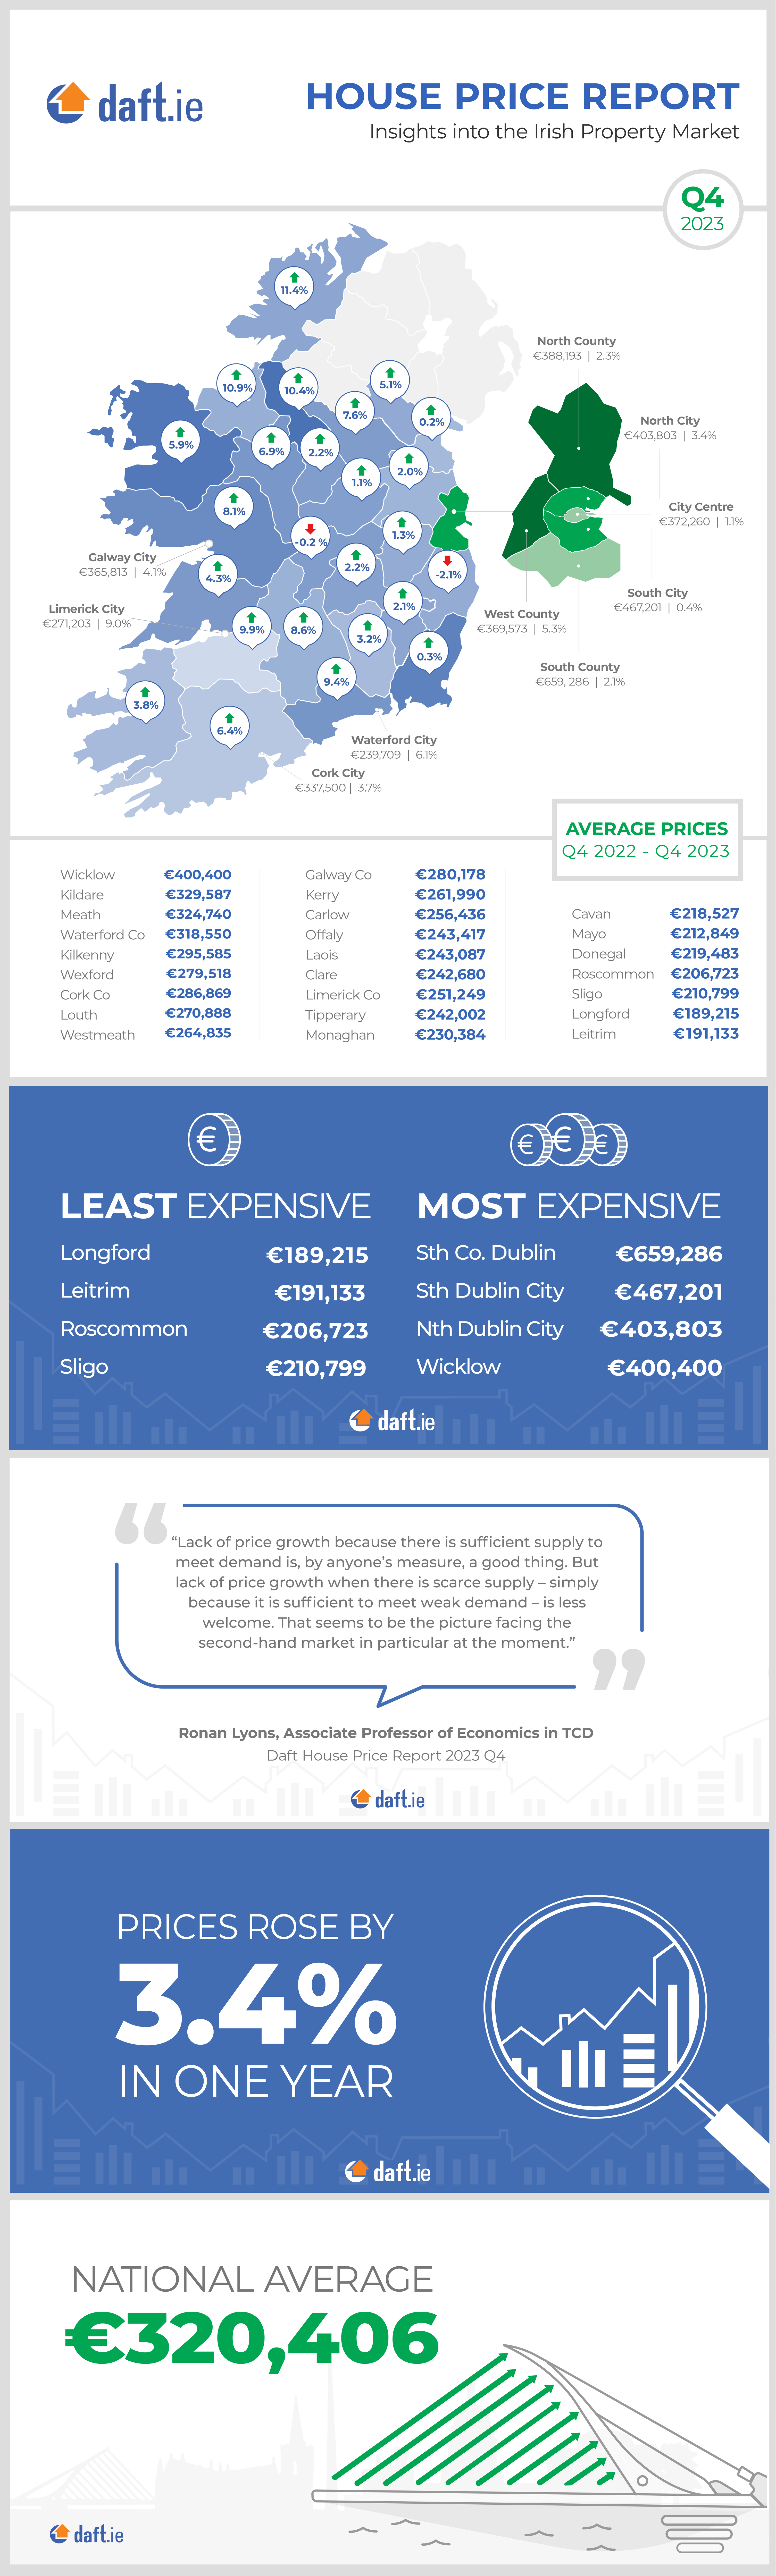 Daft.ie House Price Report: Q4 2023 Infographic